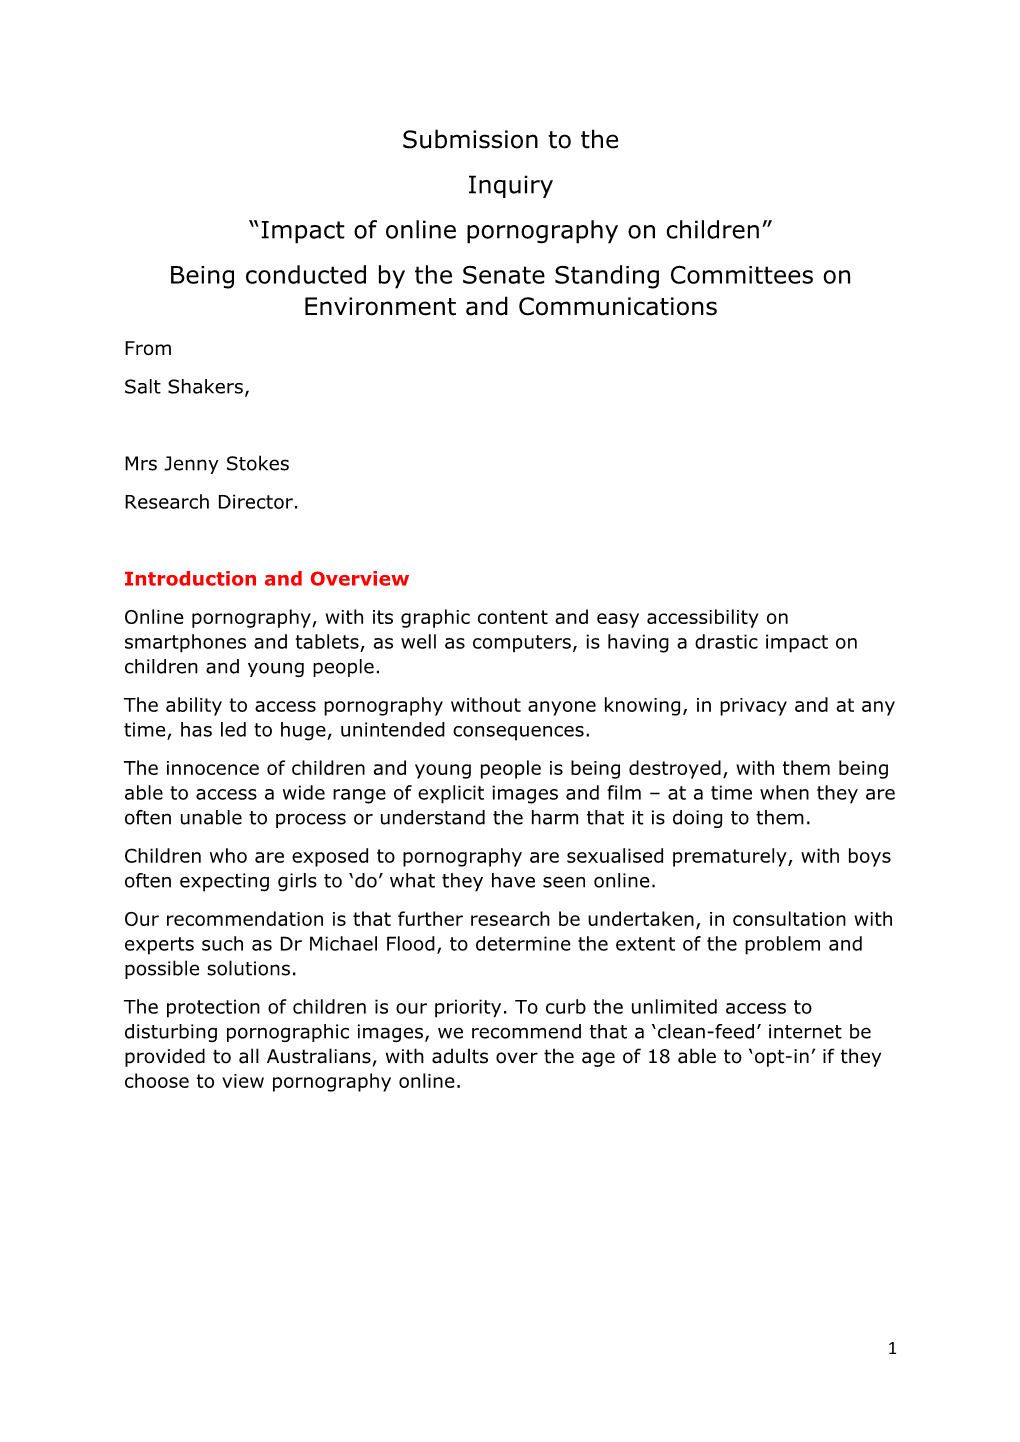 Submission to the Inquiry “Impact of Online Pornography on Children” Being Conducted by the Senate Standing Committees on Environment and Communications